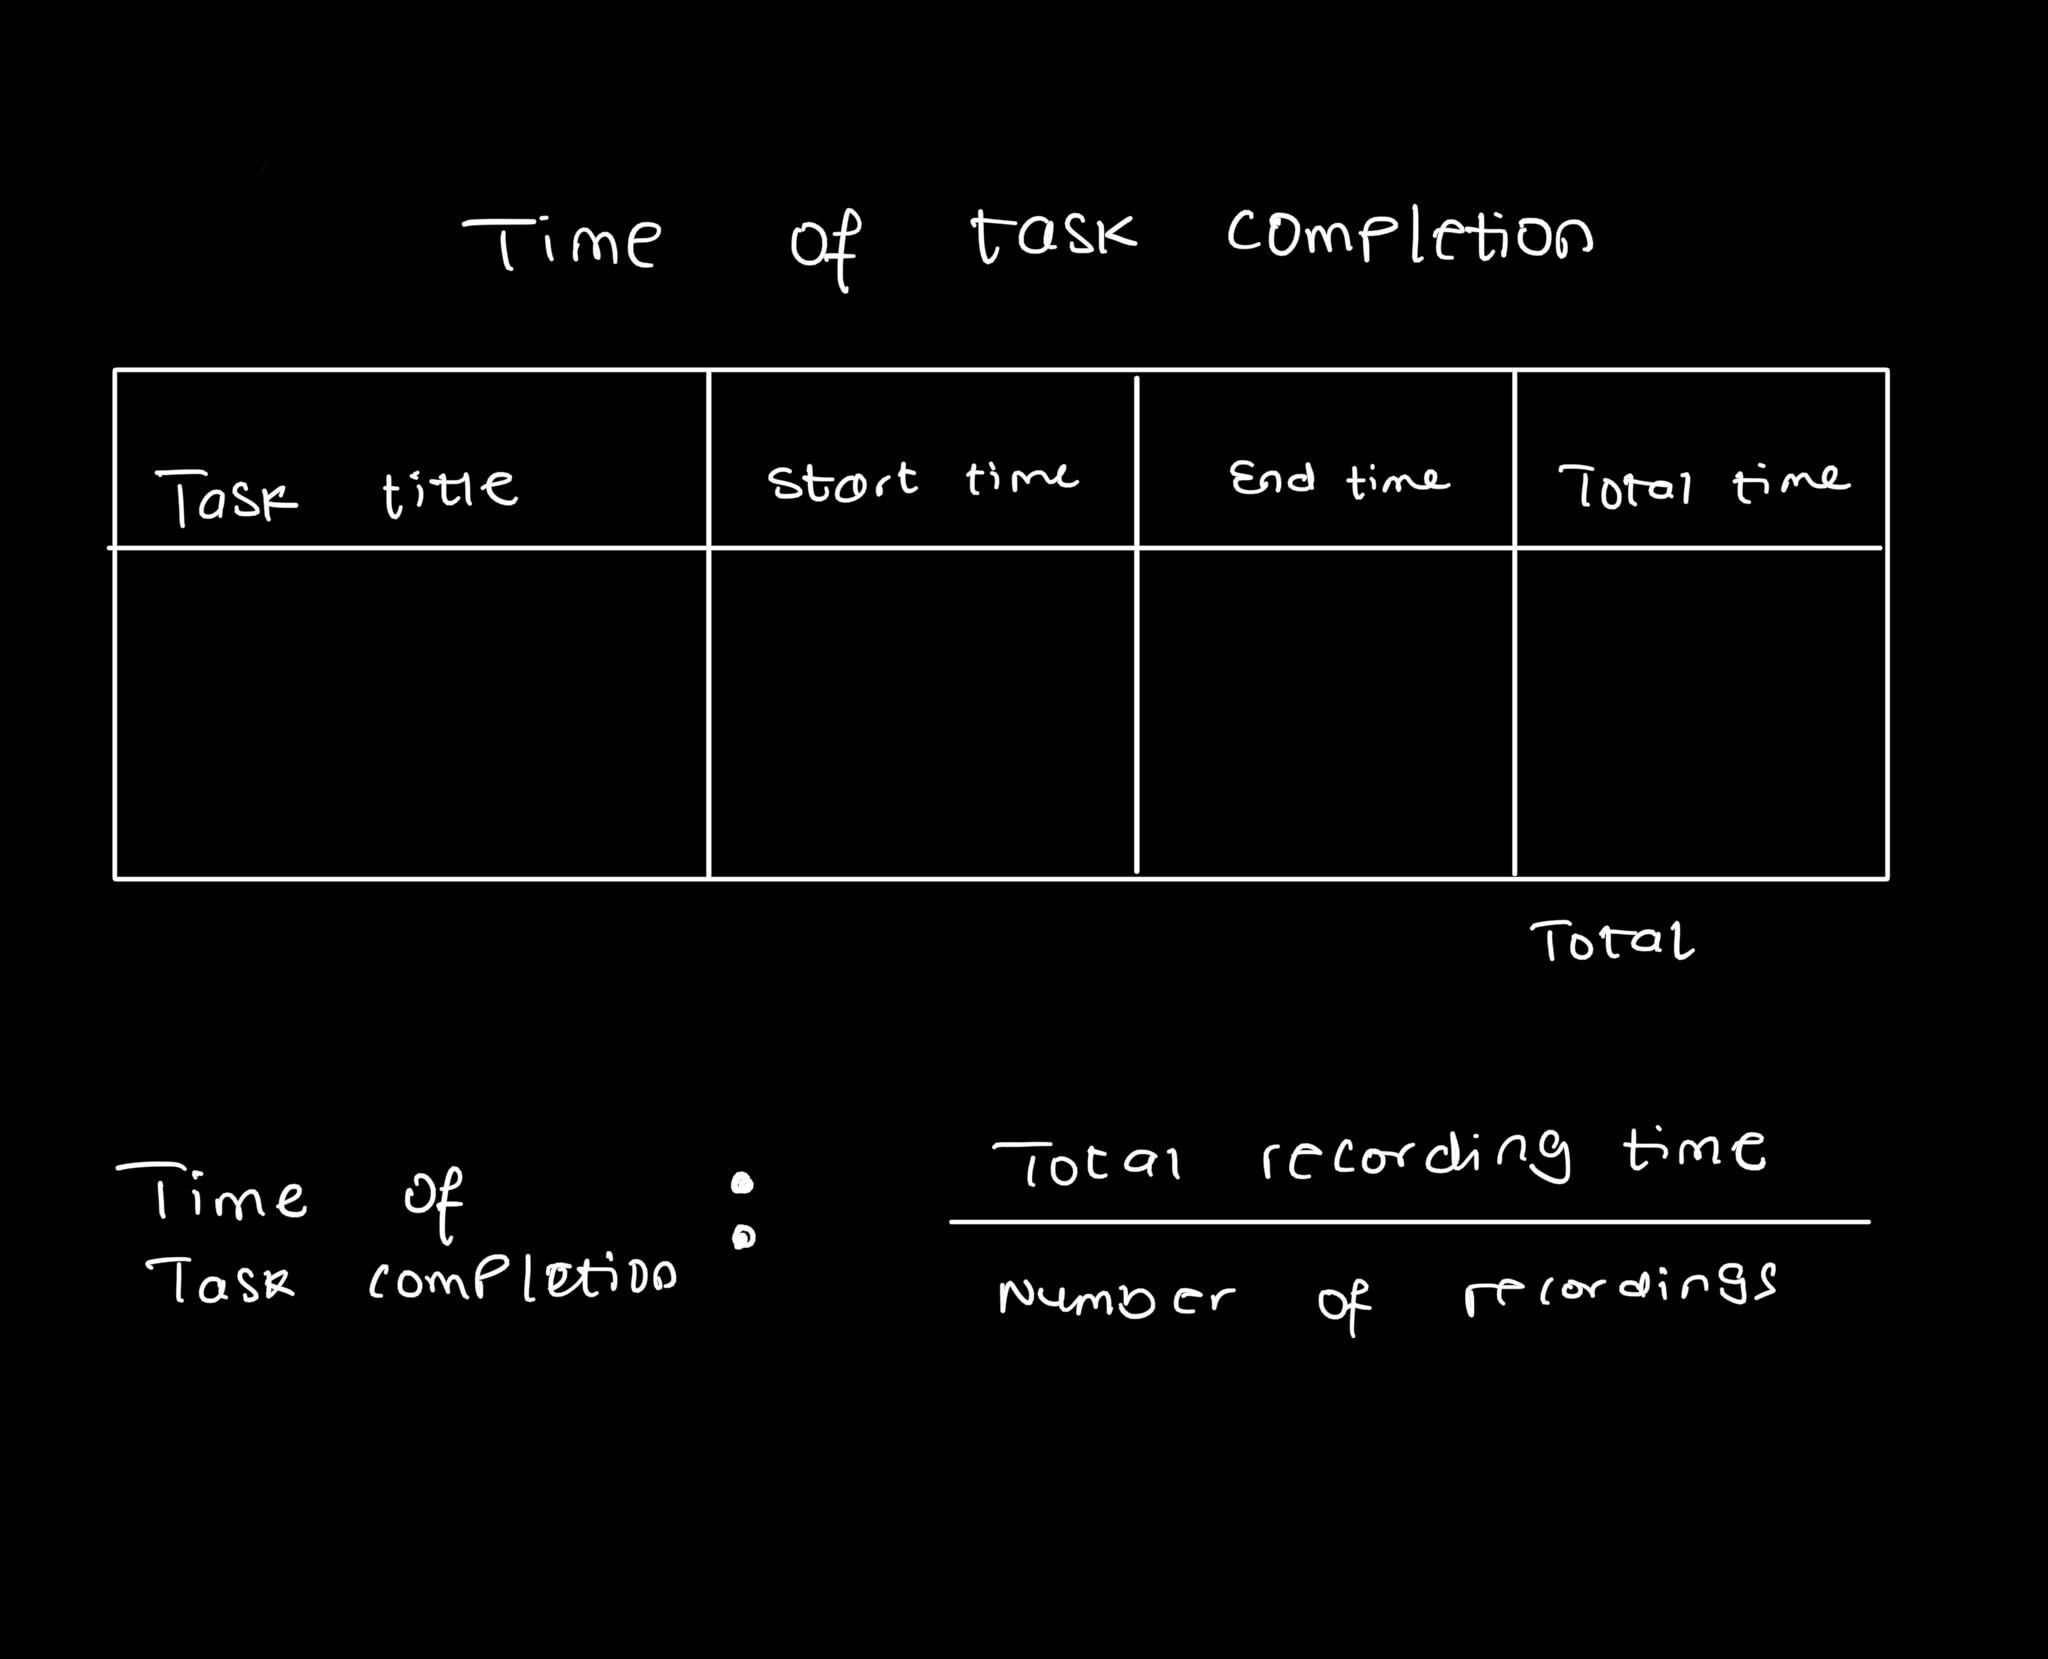 Sketch of a task completion documentation table